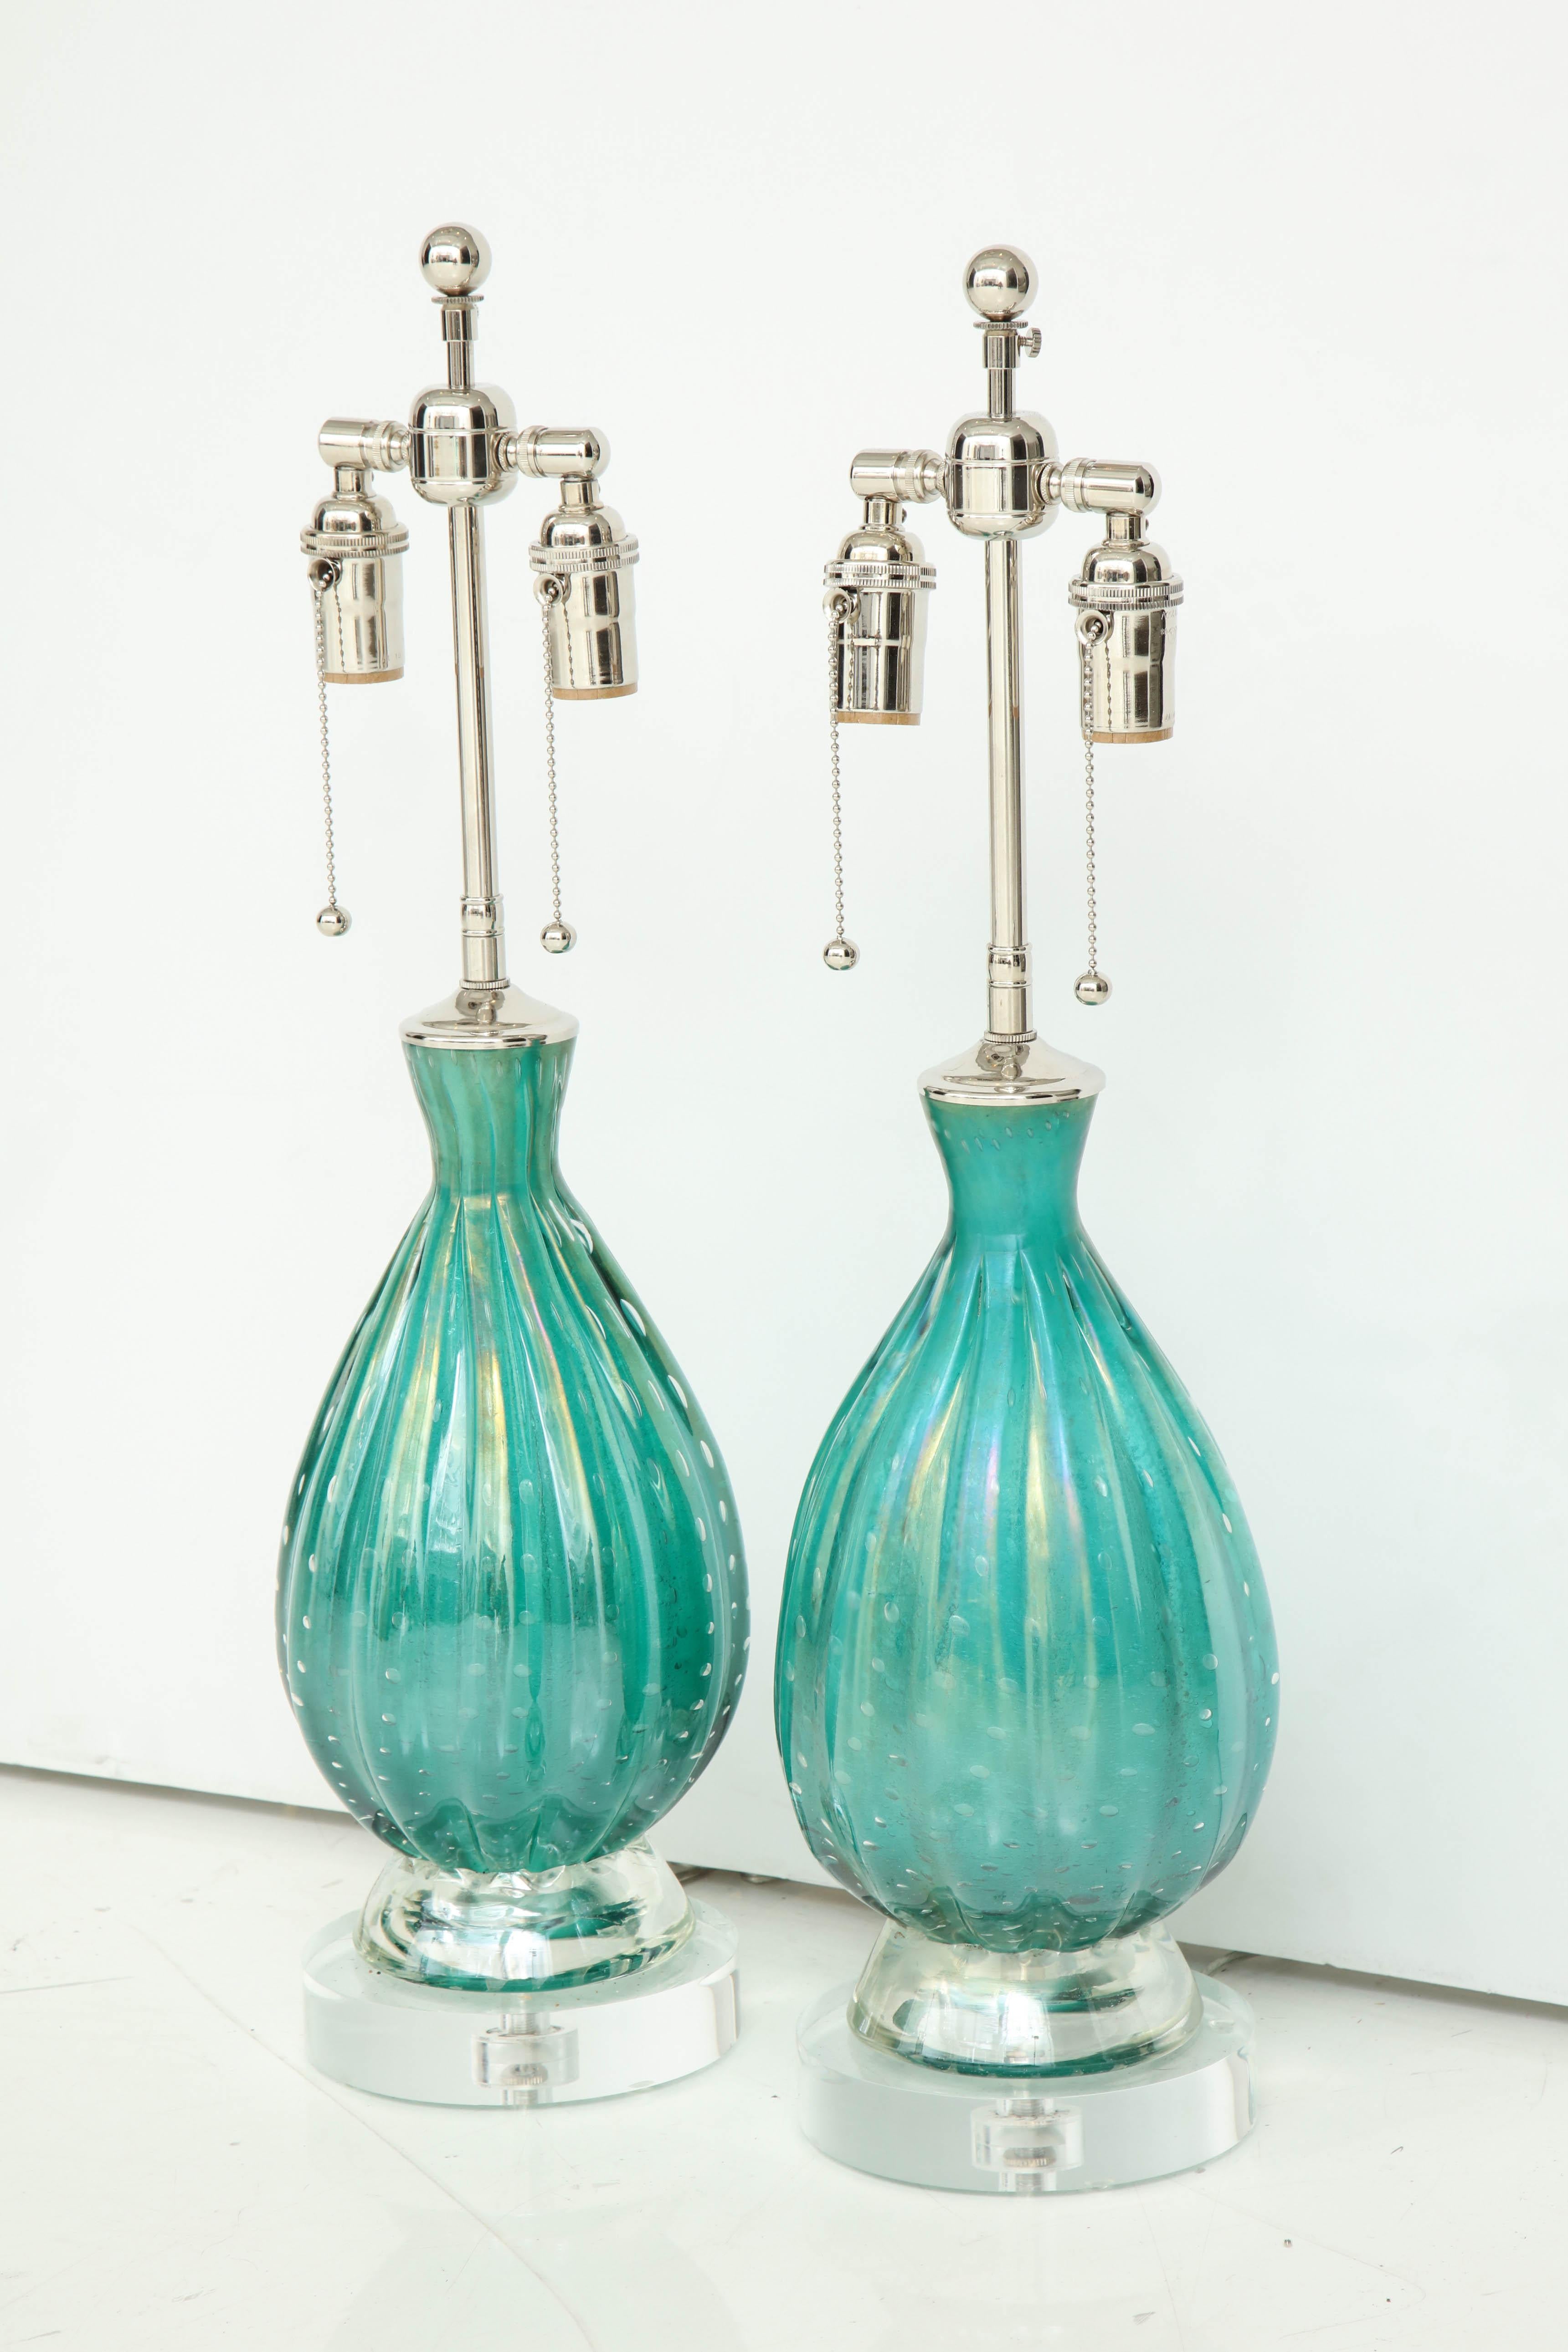 Pair of Barovier lamps with controlled bubbles in an exquisite green.
The lamps are mounted on thick Lucite bases and they have been newly rewired for the US with polished nickel double clusters that take standard light bulbs.
The overall height of